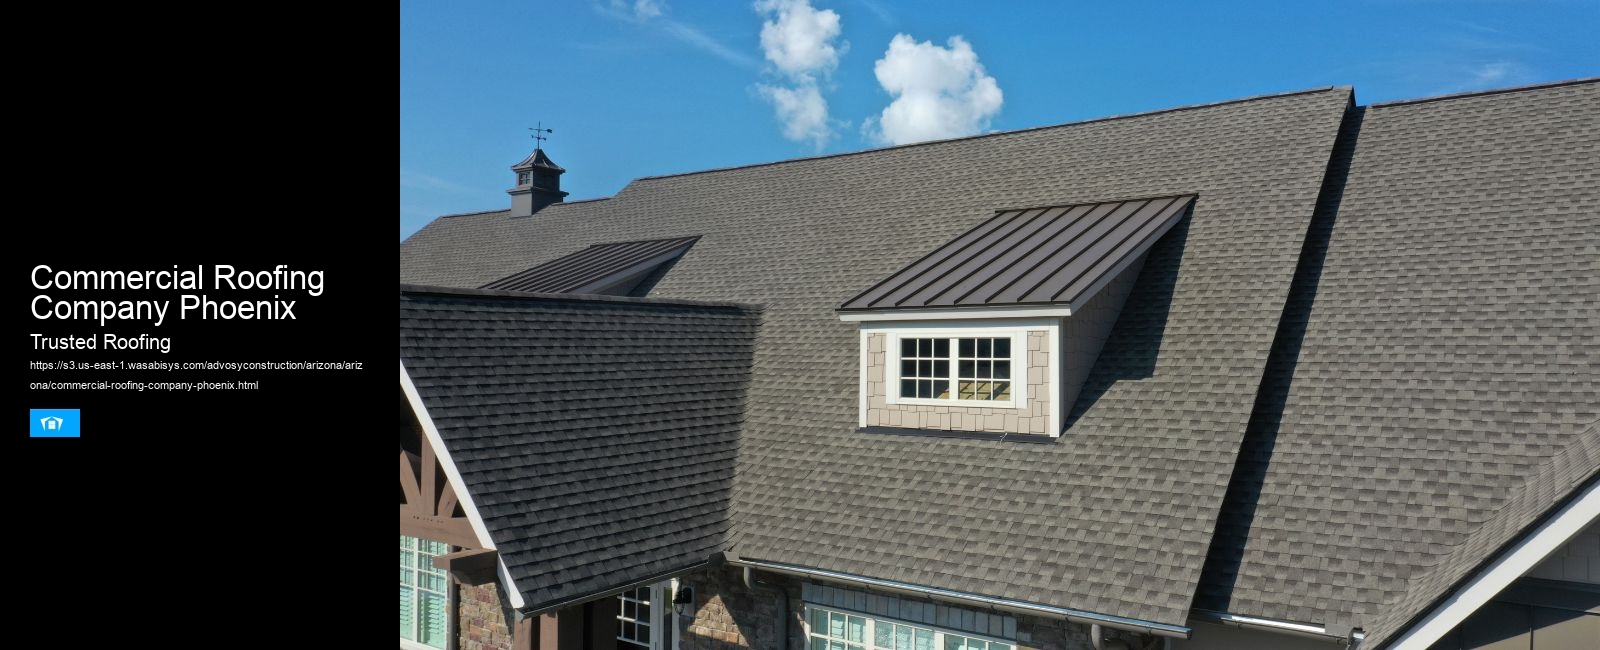 Commercial Roofing Company Phoenix